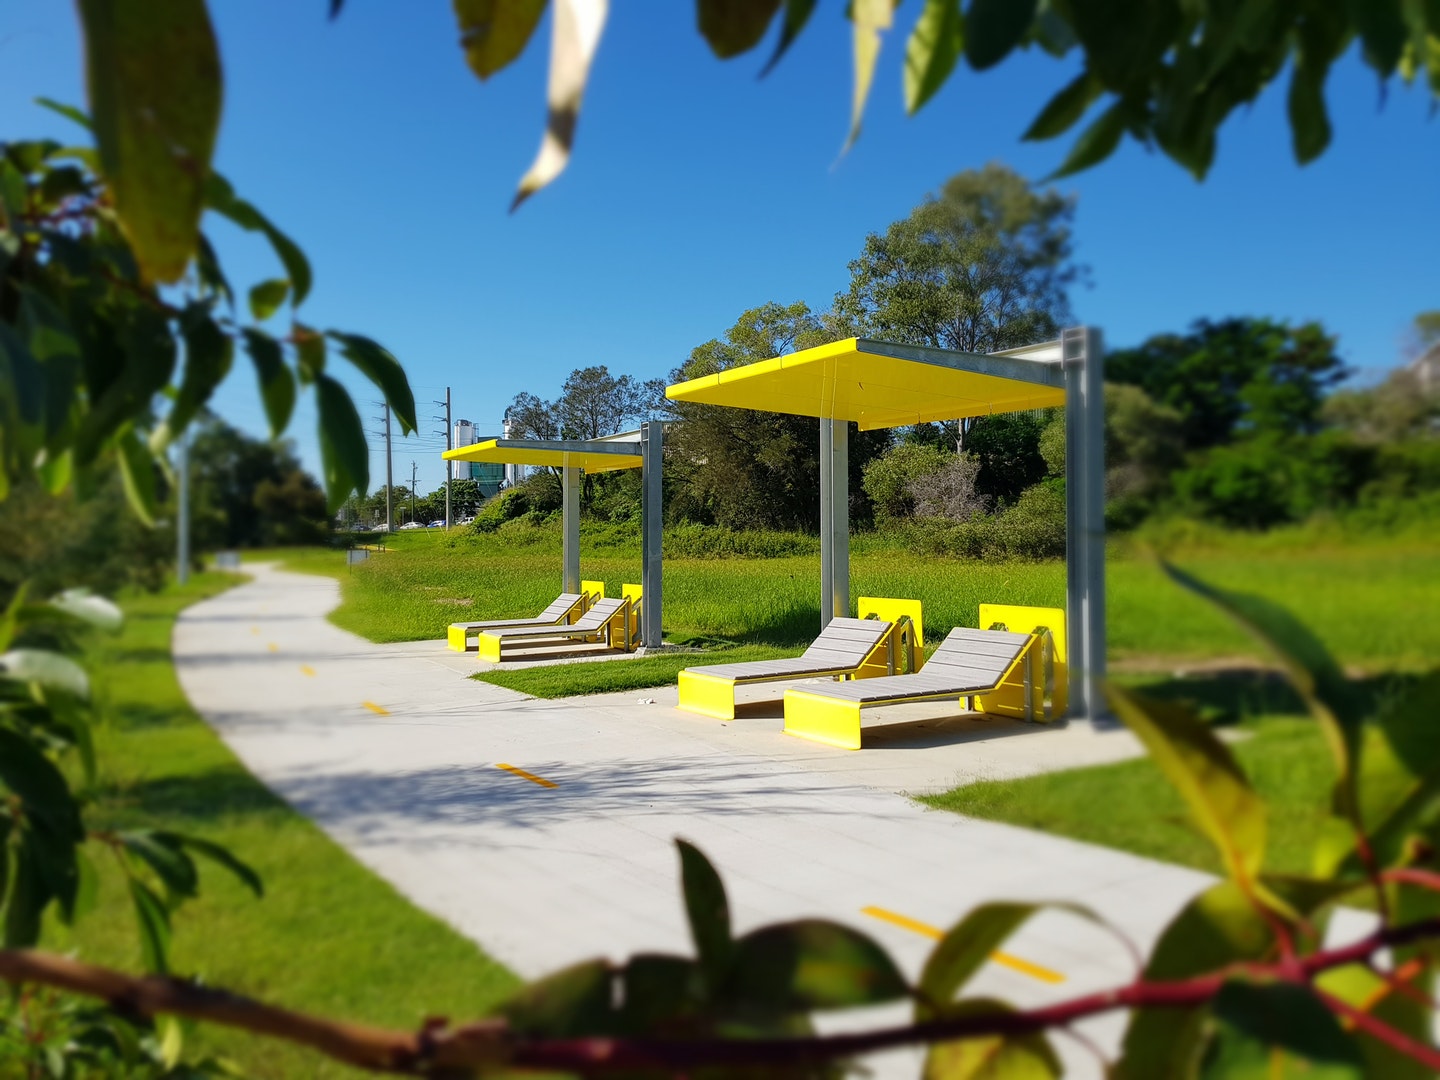 Slacks Creek track activation, sunloungers along path with yellow shelter